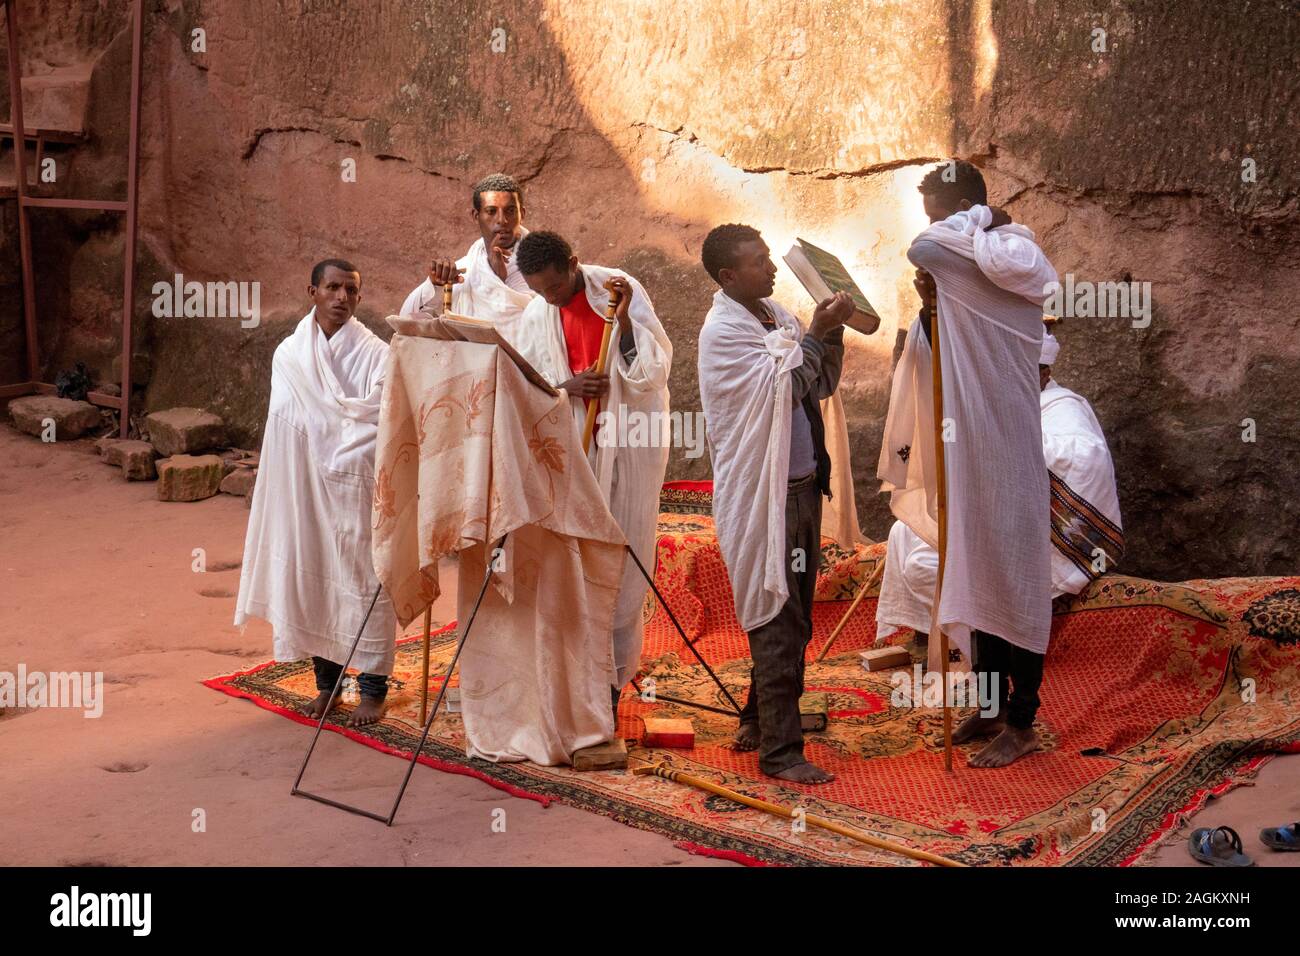 Ethiopia, Amhara Region, Lalibela, Bet Abba Libanos church, group of priests conducting open air mass in courtyard Stock Photo